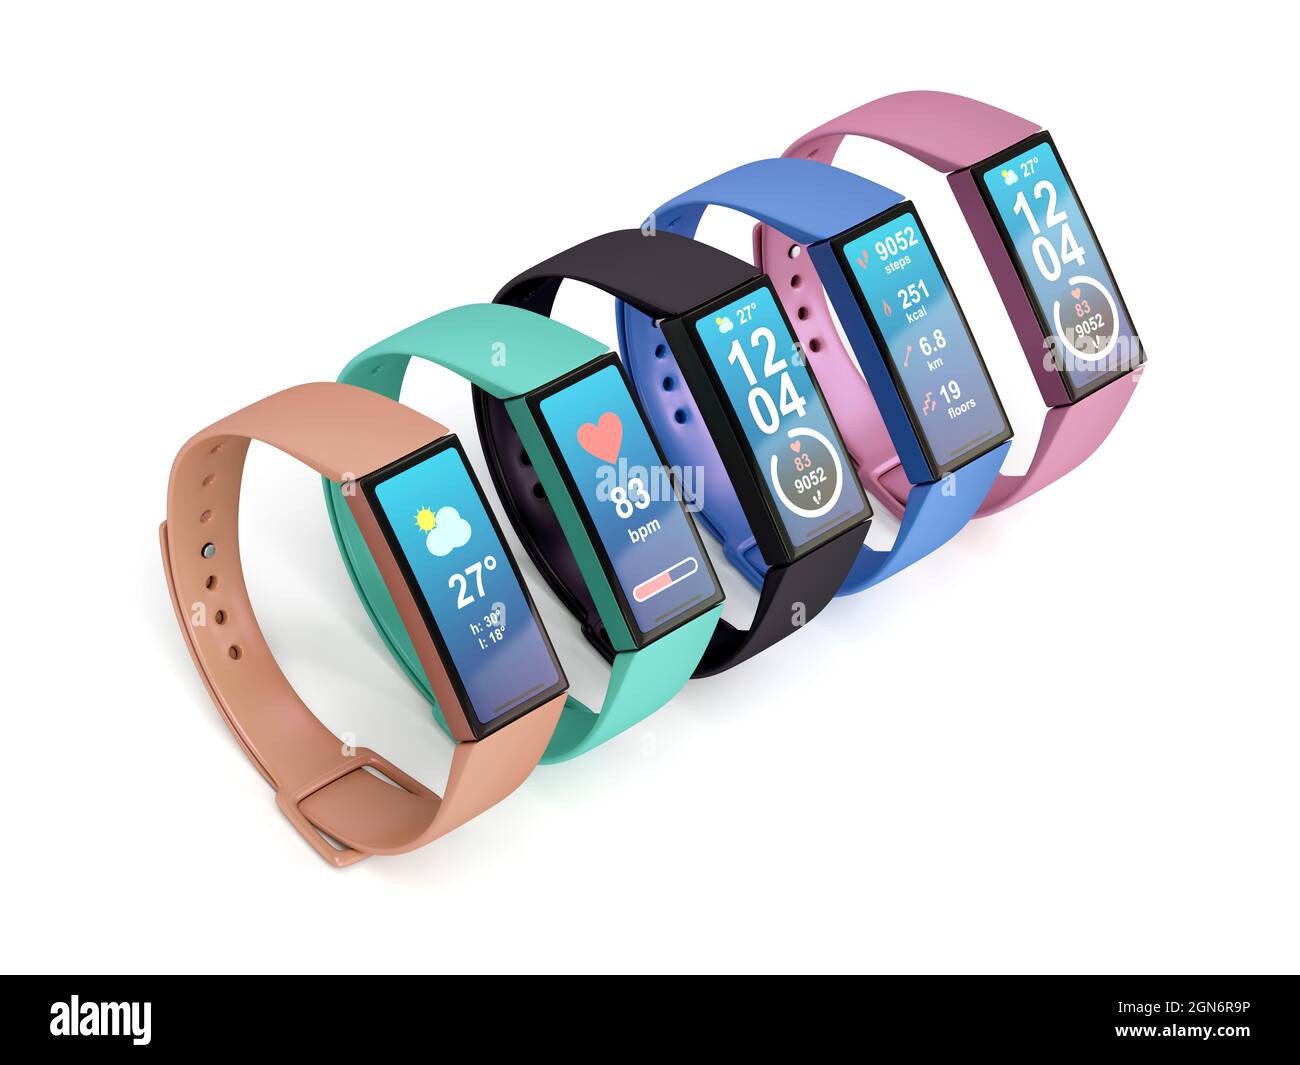 Row of five smartwatches with different colors on white background Stock Photo